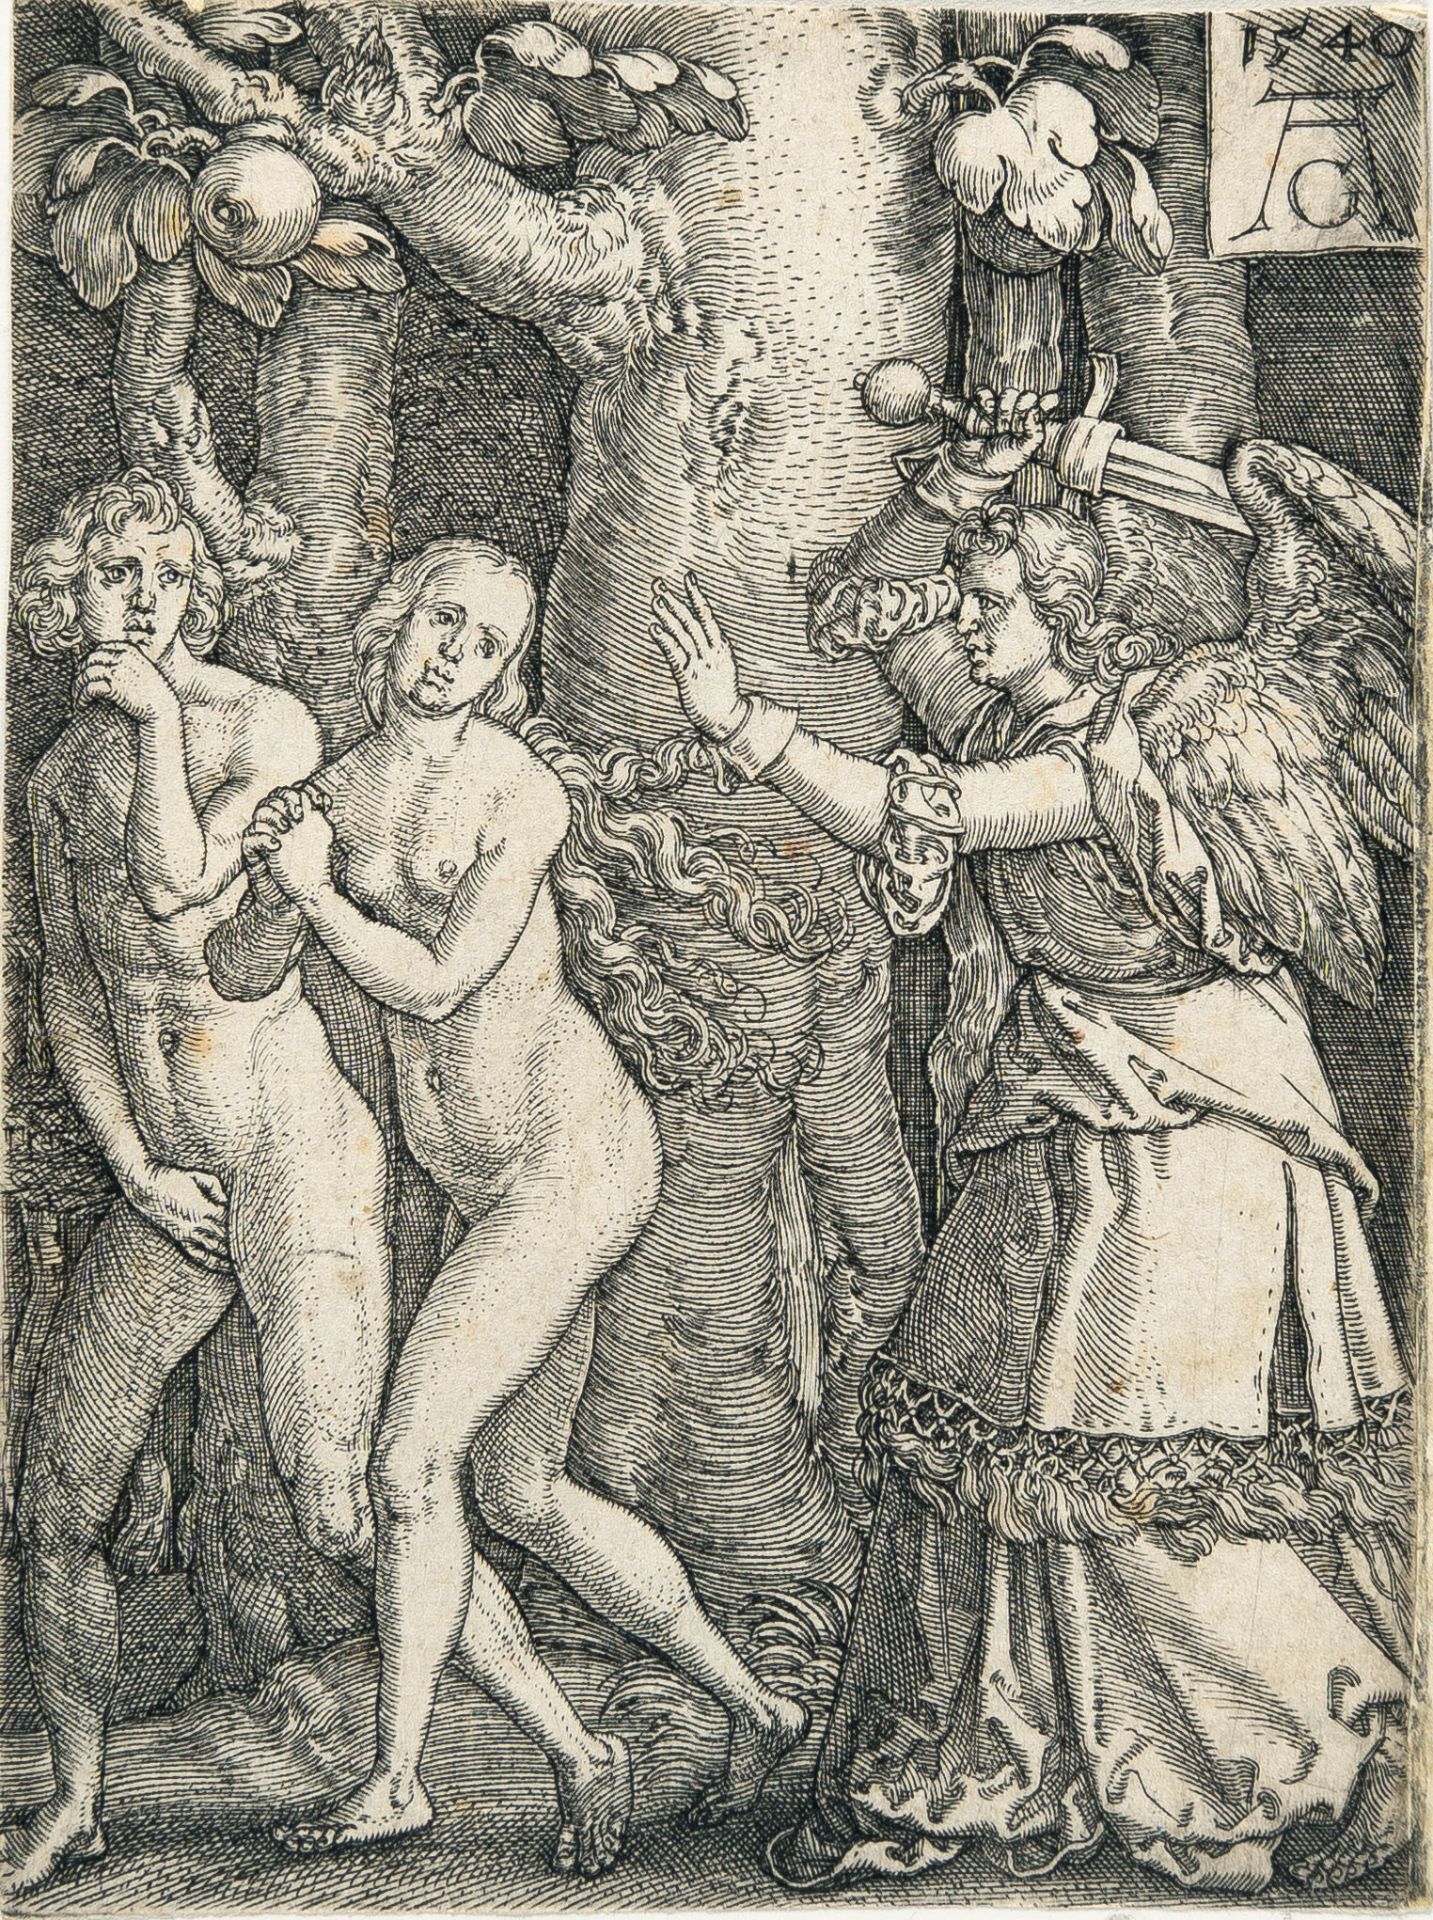 Heinrich Aldegrever, Expulsion from the Paradise.Engraving on laid paper. (1540). 8.6 x 6.5 cm (